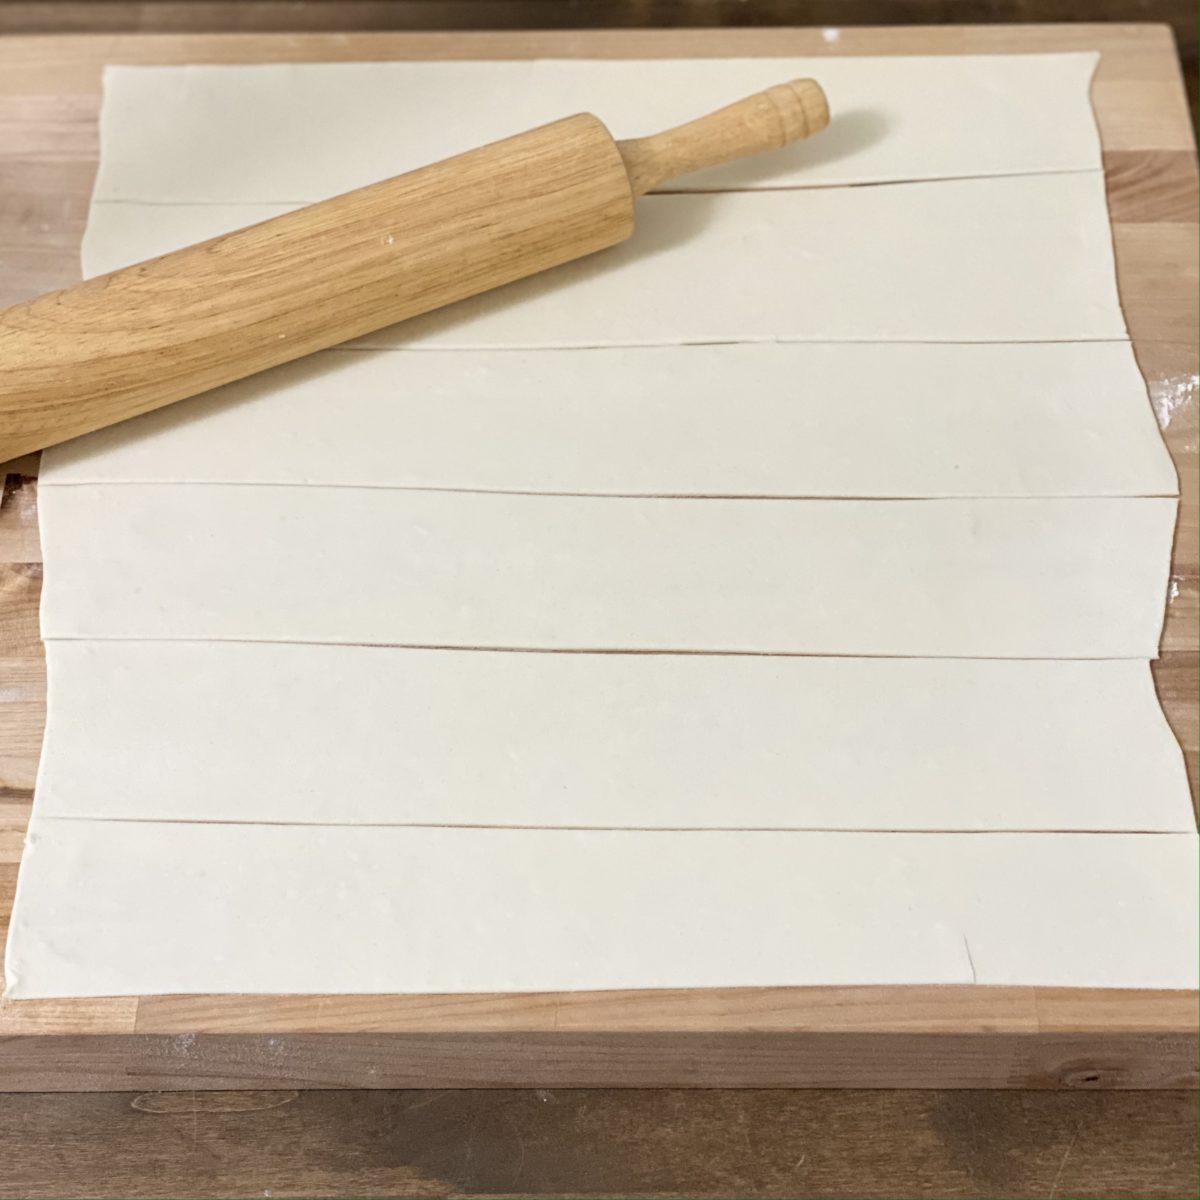 Puff pastry dough rolled out and cut into strips with a rolling pin next to it.